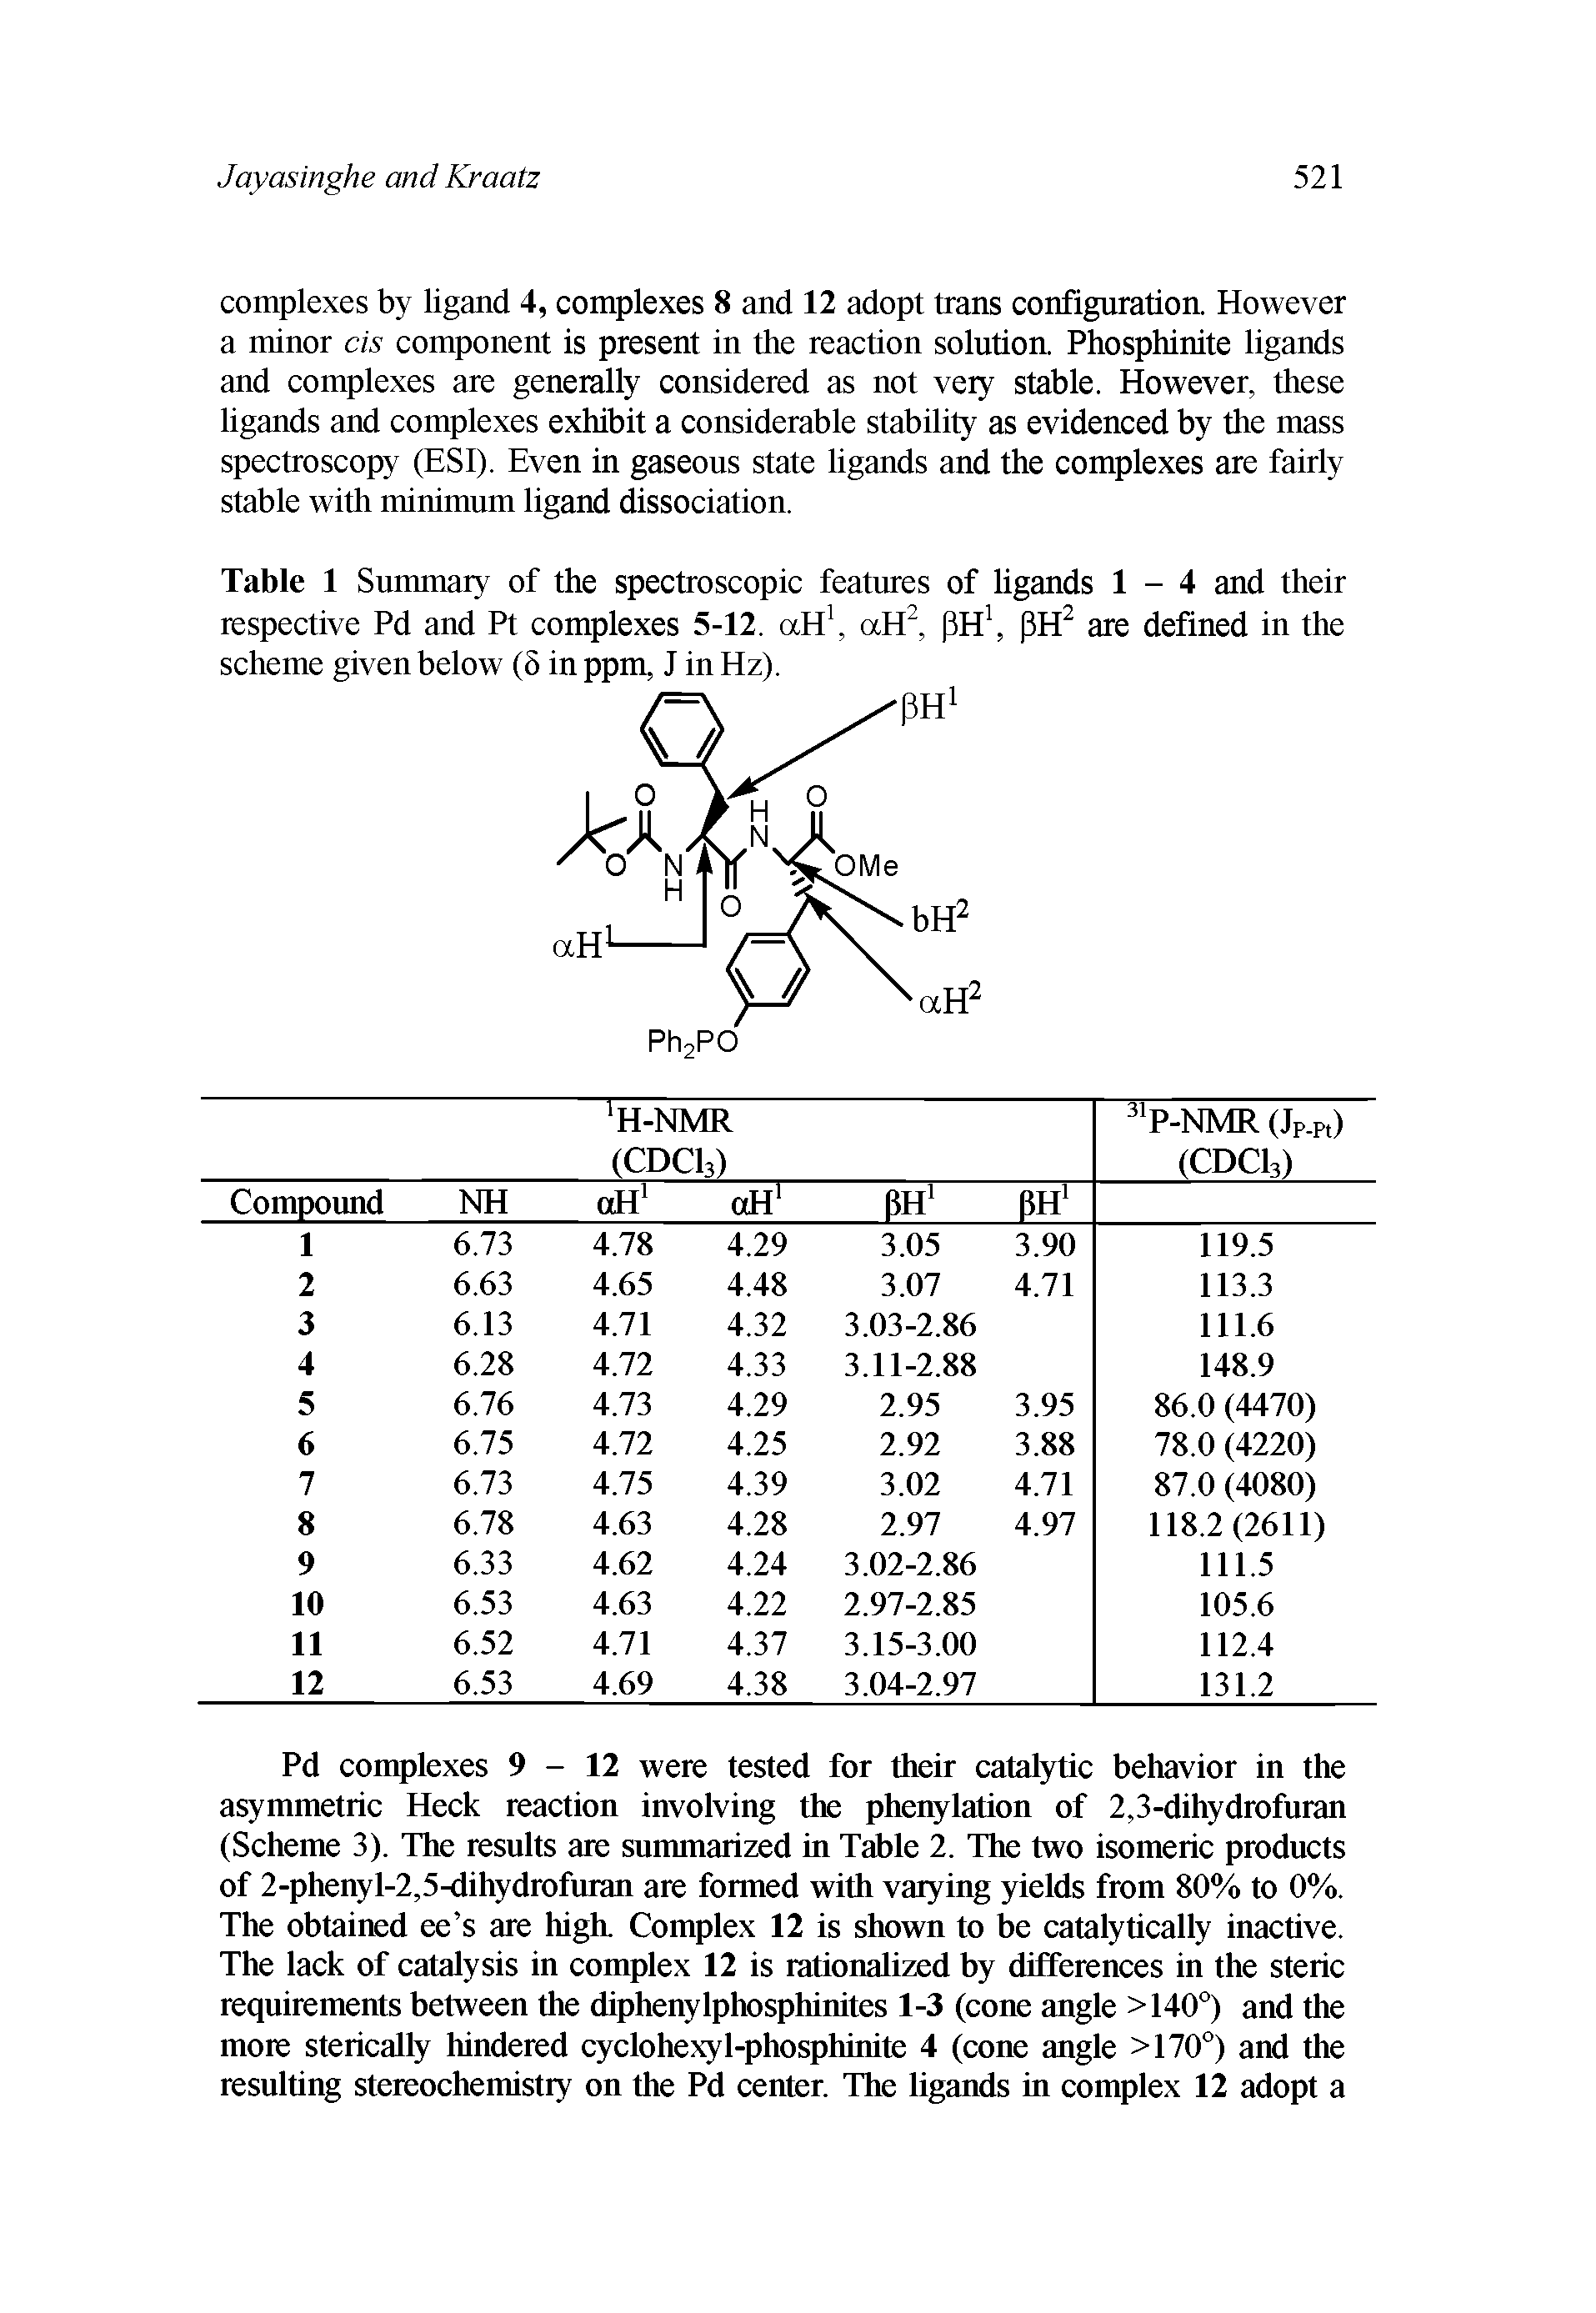 Table 1 Summary of the spectroscopic features of ligands 1-4 and their respective Pd and Pt complexes 5-12. aH1, aH2, pH1, pH2 are defined in the scheme given below (5 in ppm, J in Hz).